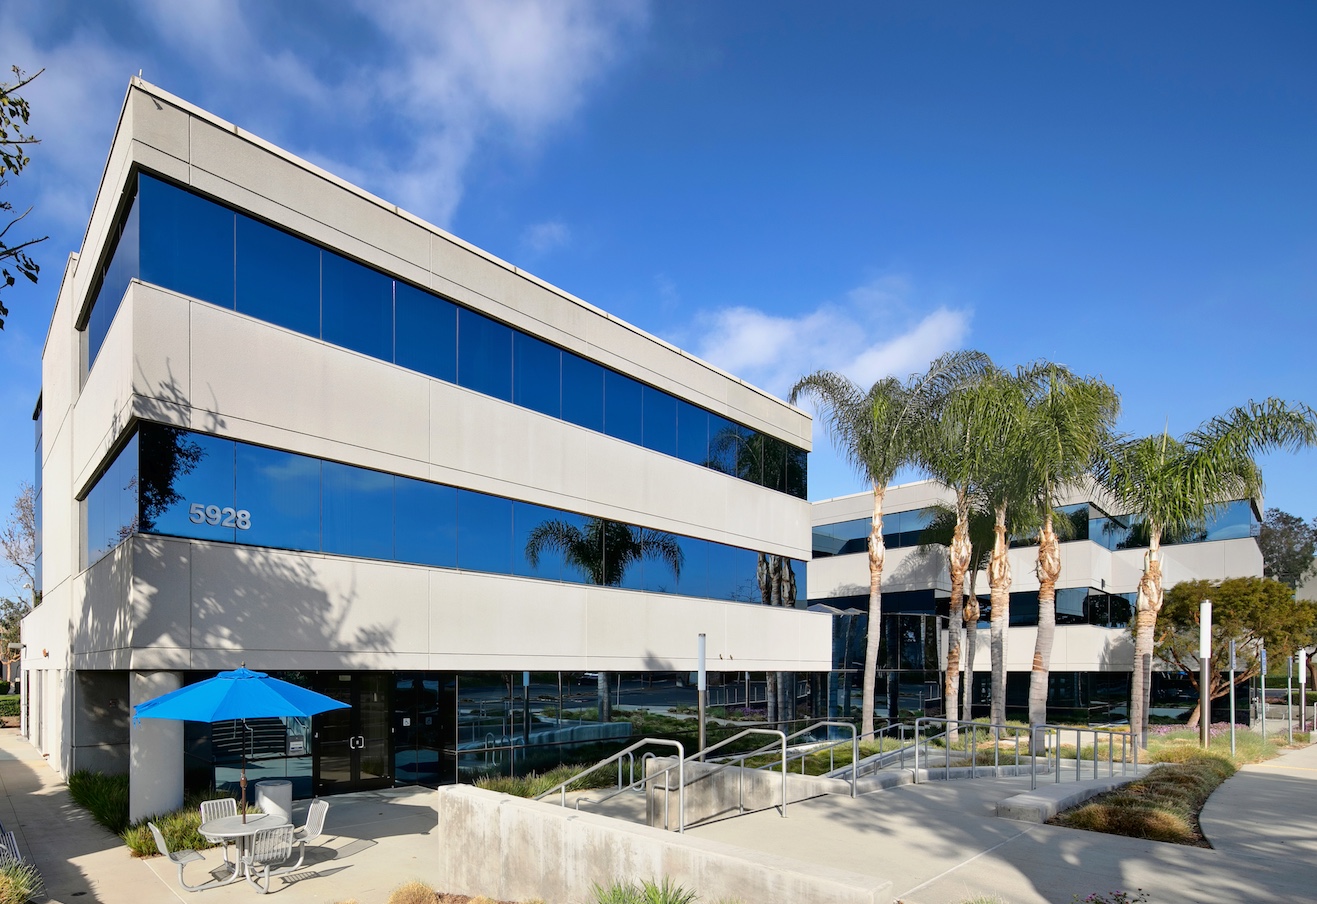 Carlsbad office building at 5928 Pascal Court.